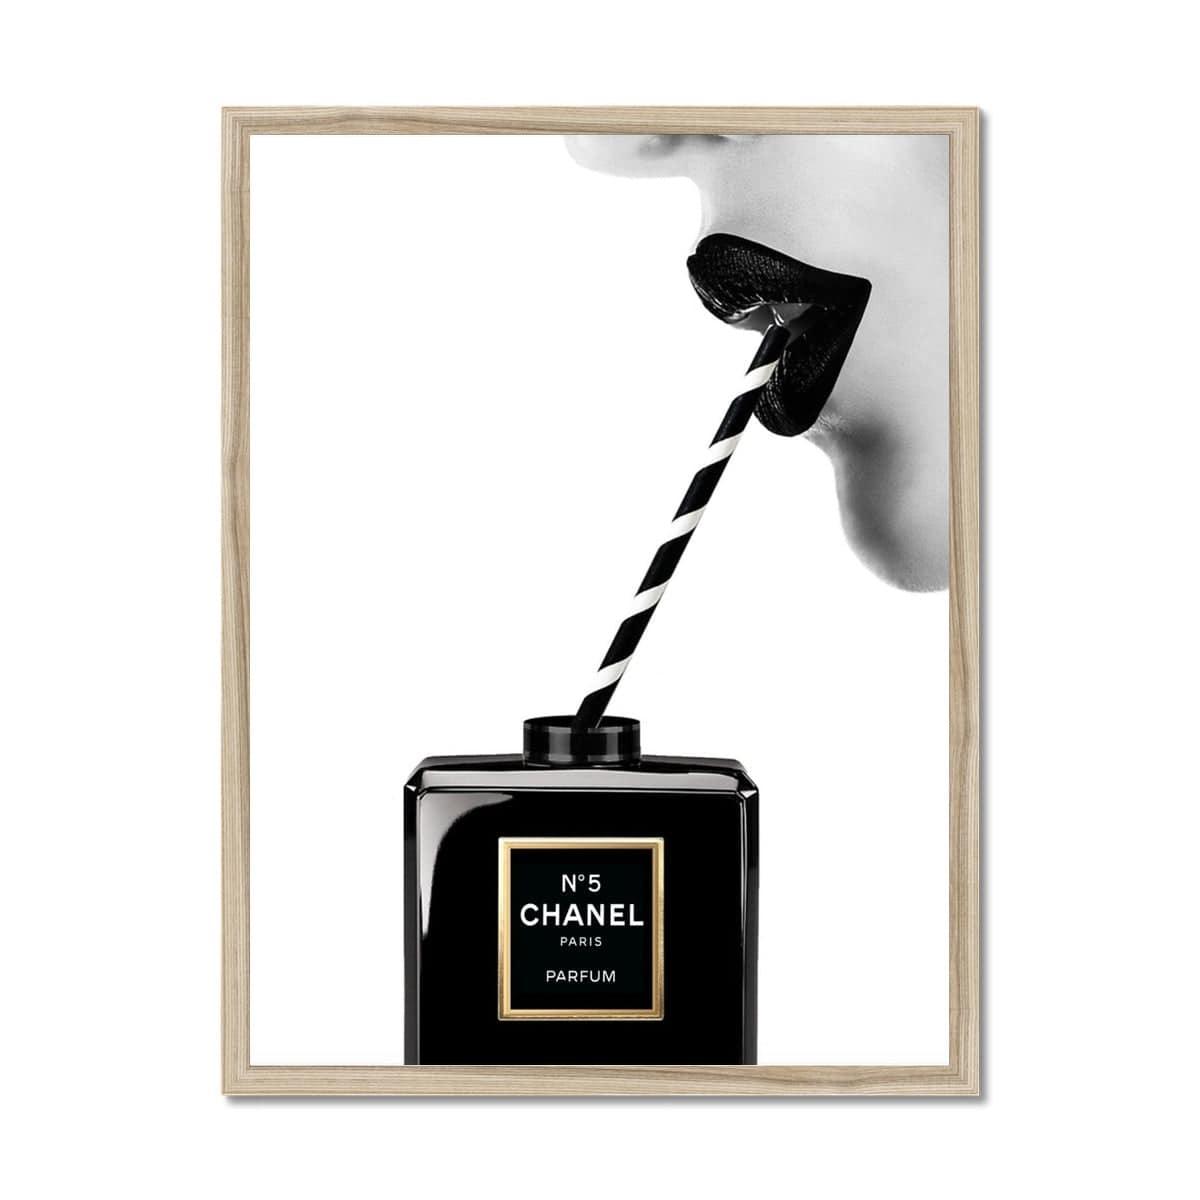 Chanel No 5 Framed Print - Products, bookmarks, design